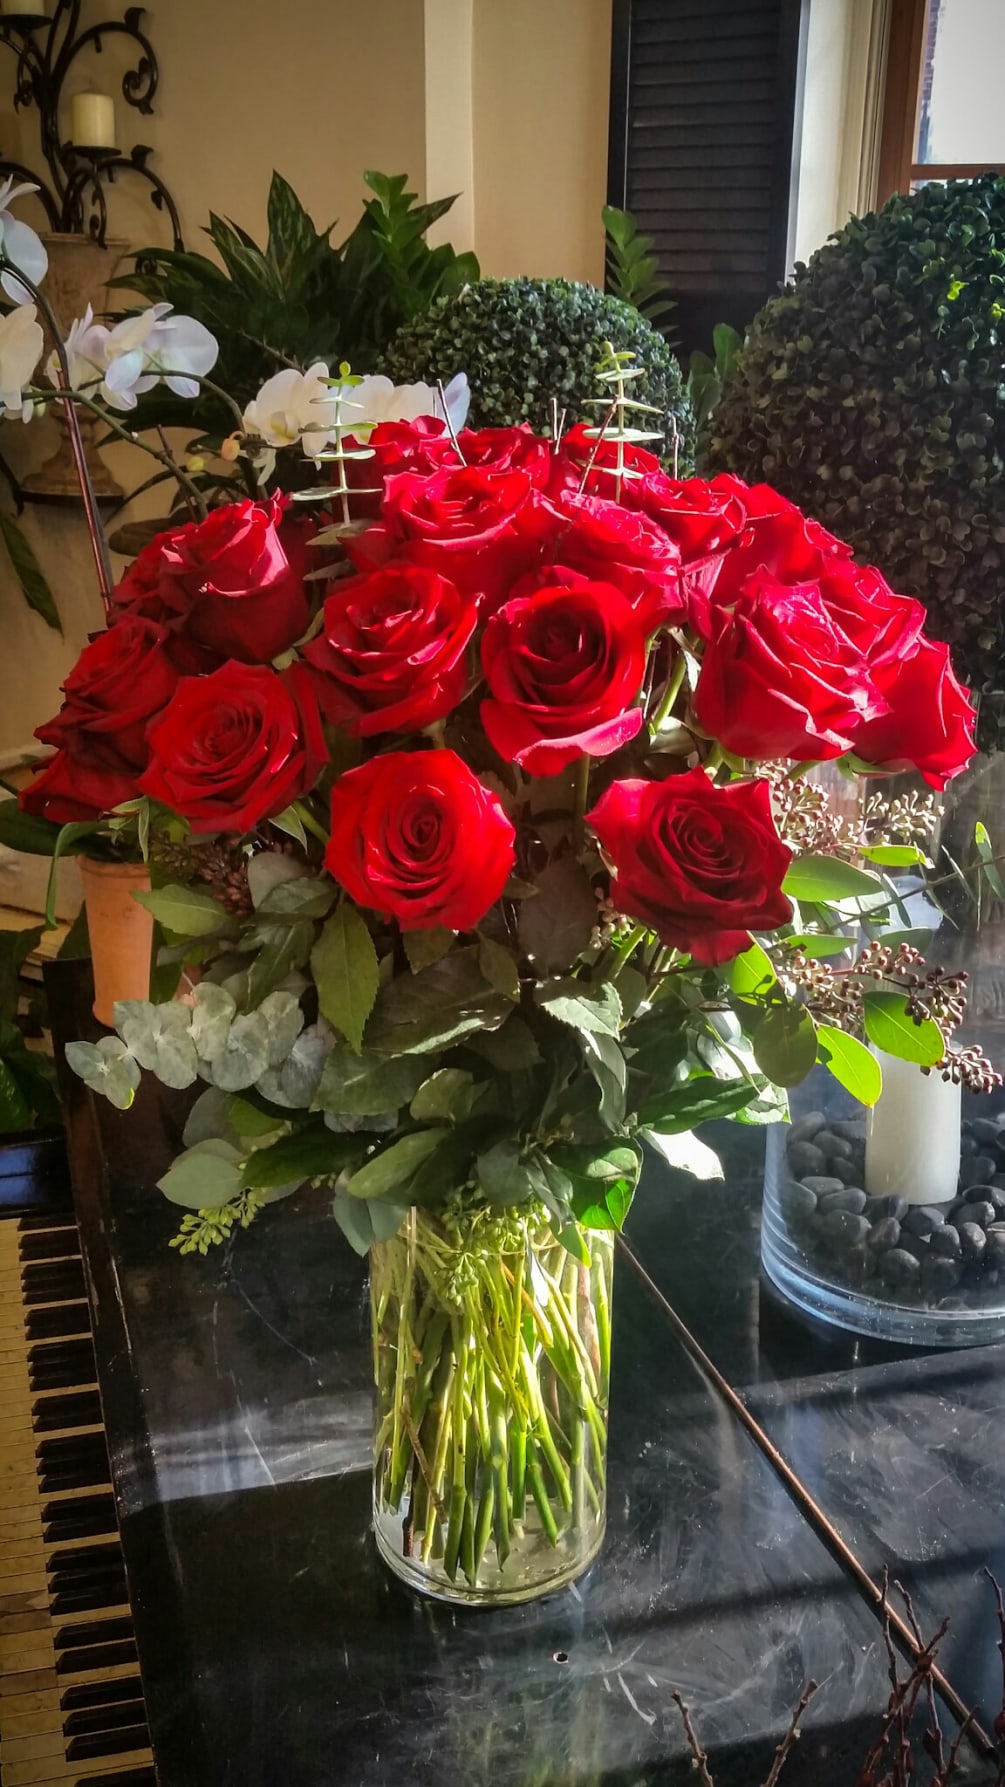 A showstopper arrangement featuring three dozen tall premium red roses complemented by